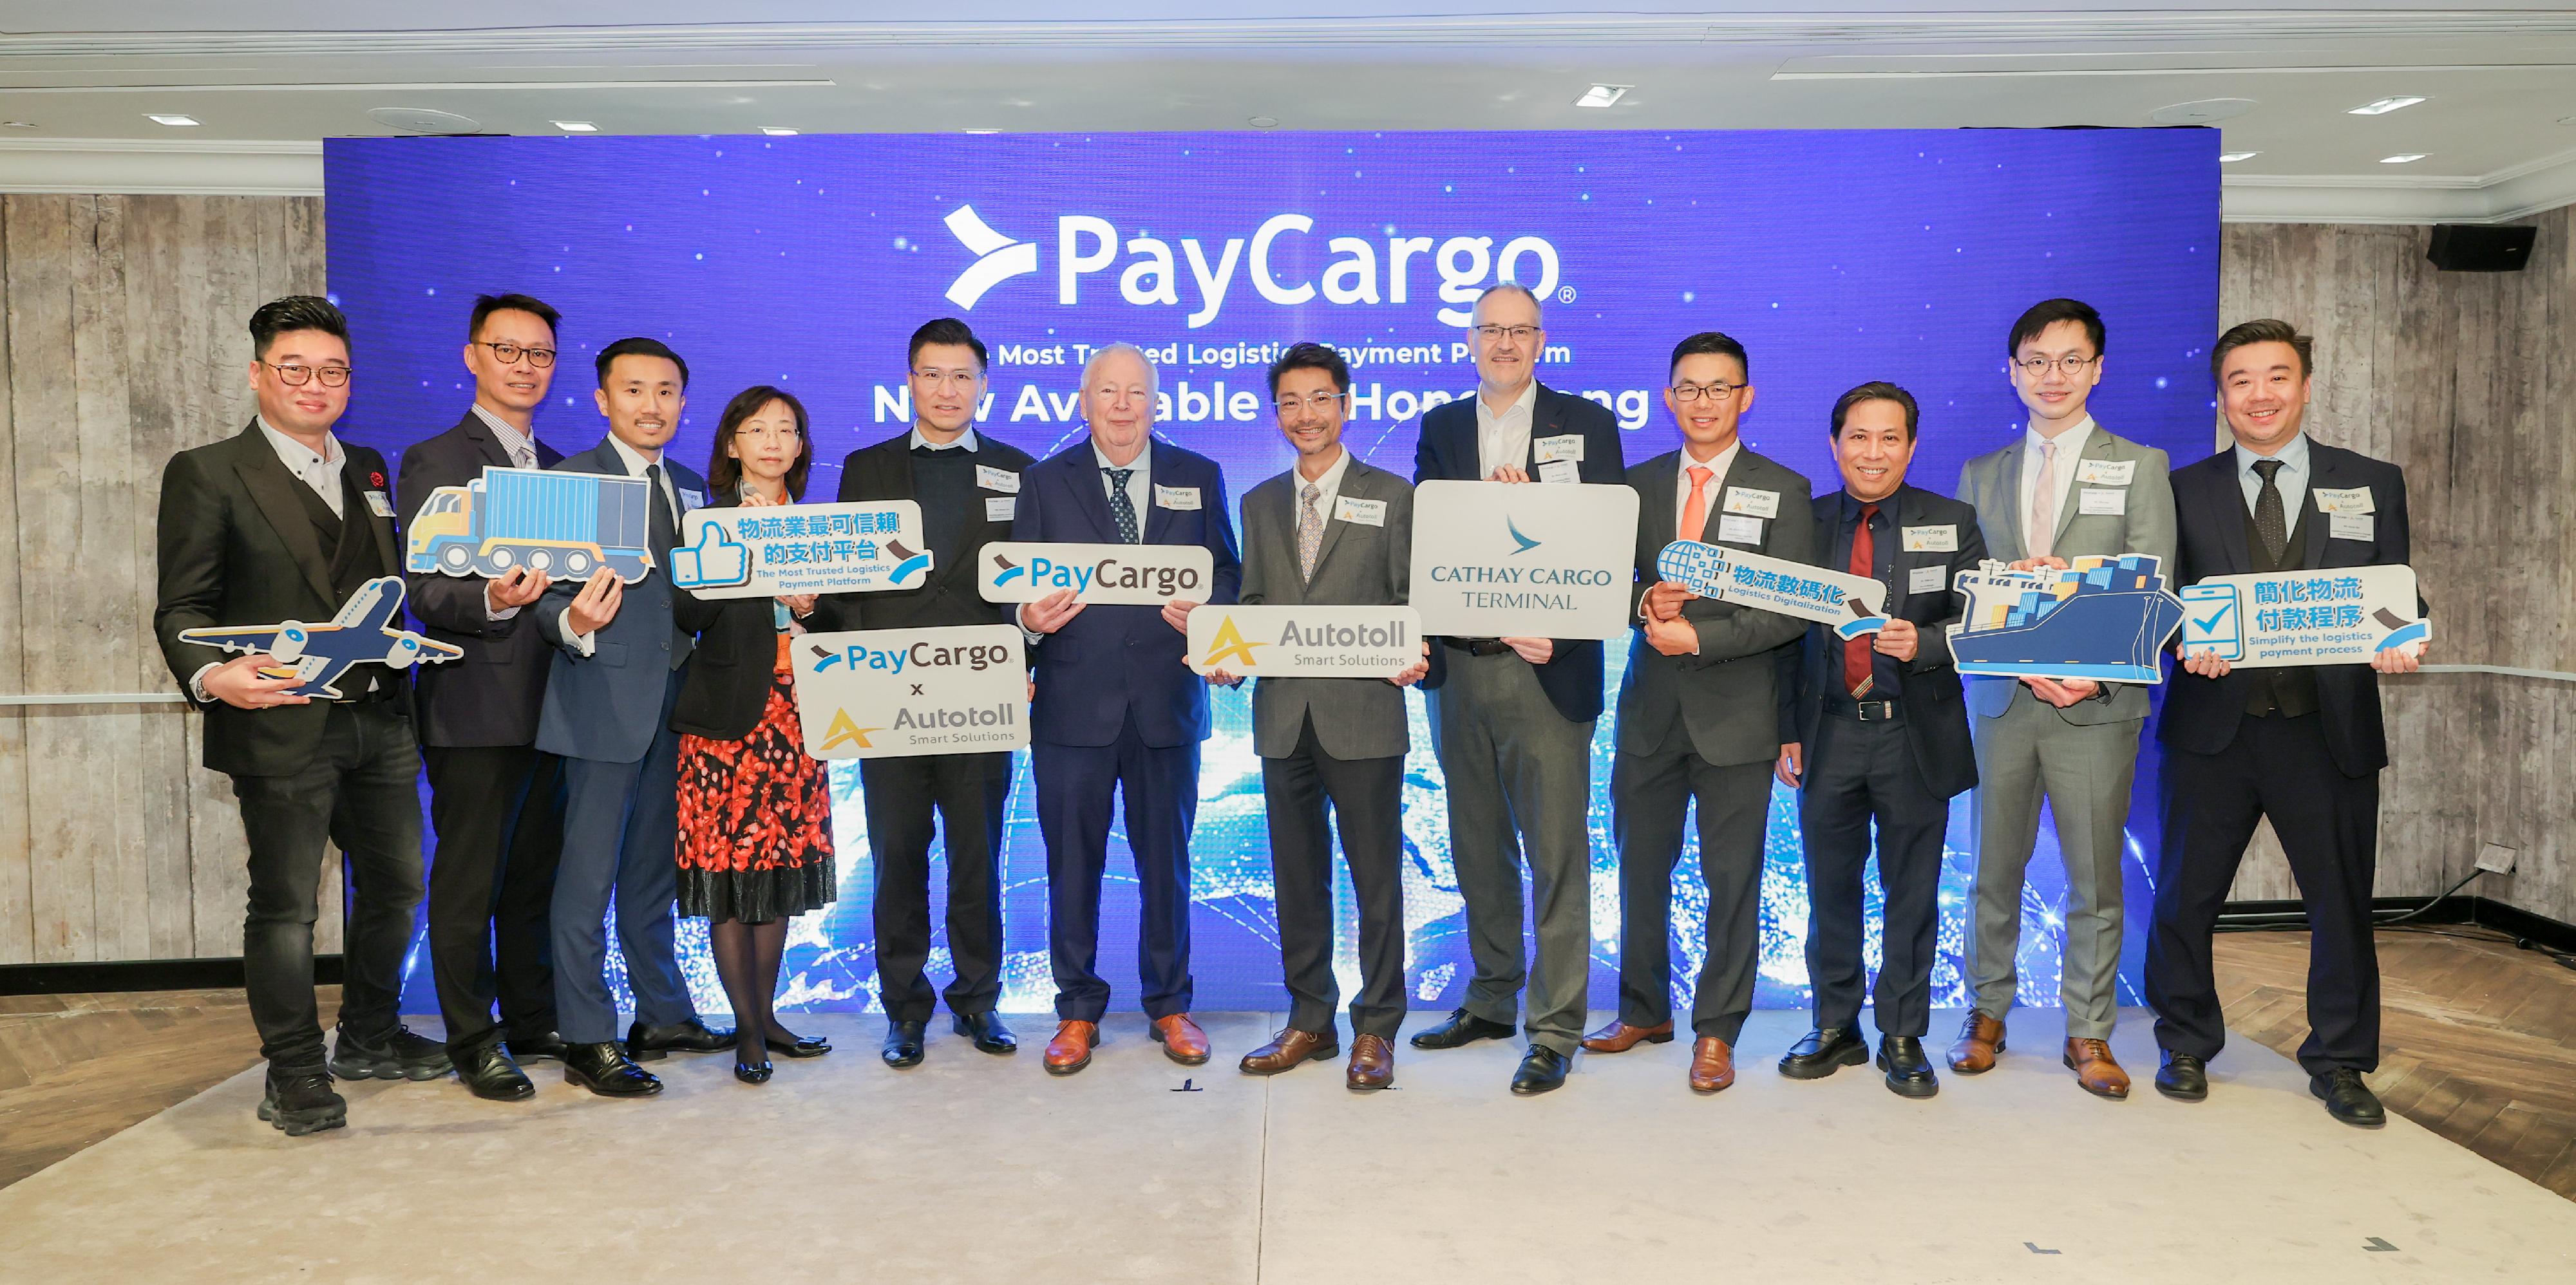 Invest Hong Kong (InvestHK) announced today (March 4) that it has assisted a United States logistics industry multi-modal payment network, PayCargo, to open its first regional office in Hong Kong as part of its overseas expansion plan in Asia via the city. Photo shows (from left) Senior Business Advisor of PayCargo Continental Asia Limited Mr Ryan Ngan; the General Manager of IoT & Telematics of Autotoll International Limited, Mr Owen Leung; the Commercial Director, Asia of PayCargo Continental Asia Limited, Mr Morgan Law; the Deputy Head of Financial Services & Fintech of InvestHK, Ms Karen Mak; Legislative Council Member (Functional Constituency - Technology and Innovation) Mr Duncan Chiu; the Chief Executive Officer of PayCargo International, Mr Adrie Reinders; the Deputy Chief Executive Officer of Autotoll International Limited, Mr Karel Au; the Chief Operating Officer of Cathay Cargo Terminal, Mr Mark Watts; the General Manager, Australia of PayCargo, Mr Alvan Aiau Yong; the General Manager of Dimerco Air Forwarders (H.K.) Limited, Mr Eddie Law; the Vice President (Fintech) of the Office for Attracting Strategic Enterprises, Mr Max Lau; and Marketing and Communications Manager of Autotoll International Limited Mr Henry Yau at the opening ceremony.

